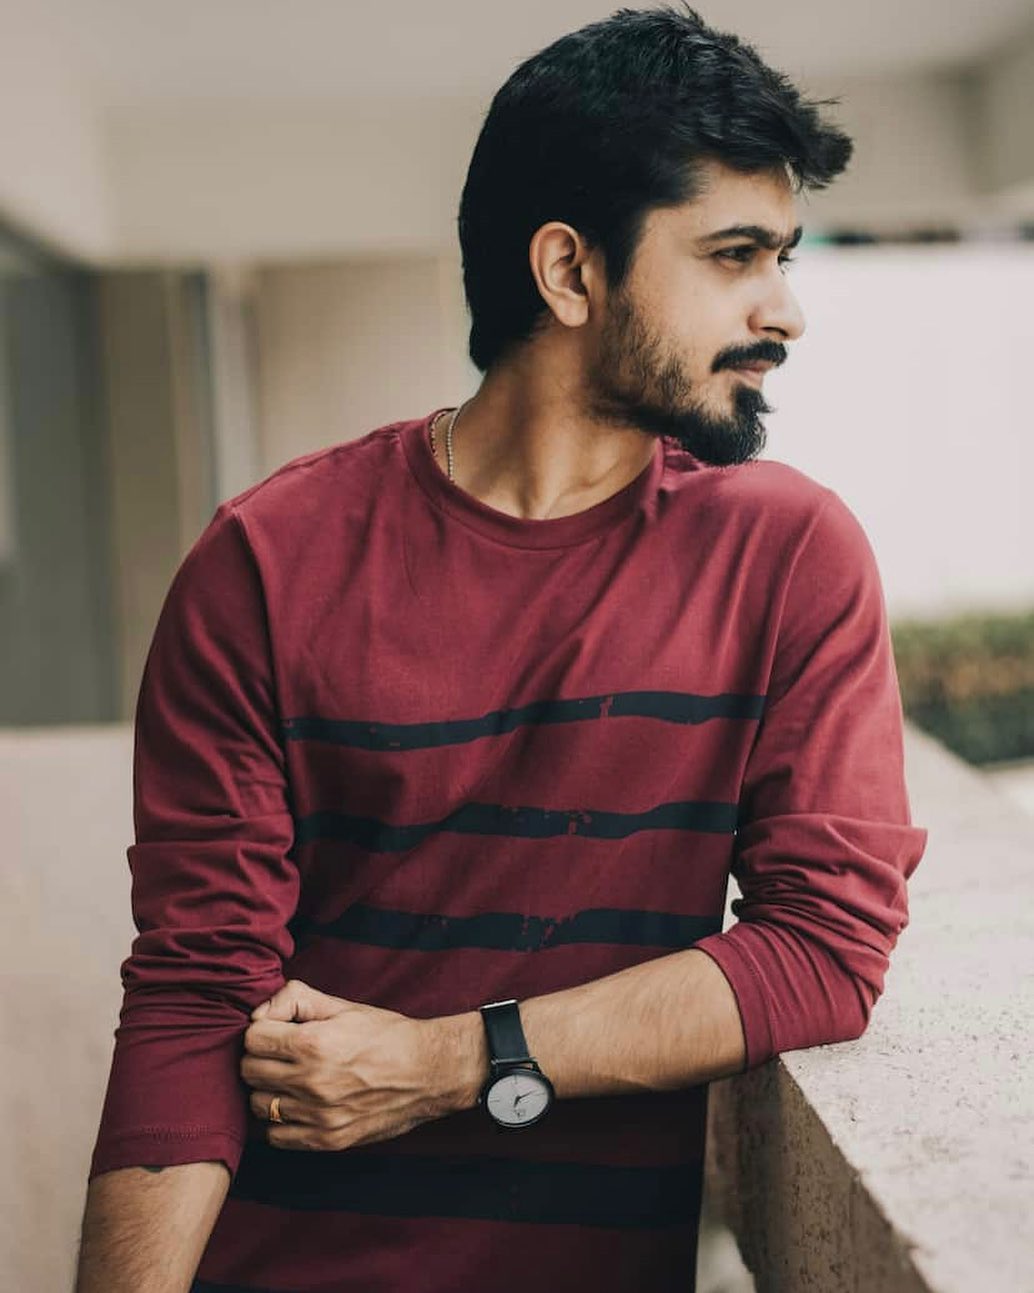 MYNTRA - Styling your Fridays effortlessly with stripes!
📸 @pun.jwani 
Look up similar product code: 1697714 (T-shirt) / 2272201 (Jeans)
For more on-point looks, styling hacks and fashion advice, tune...